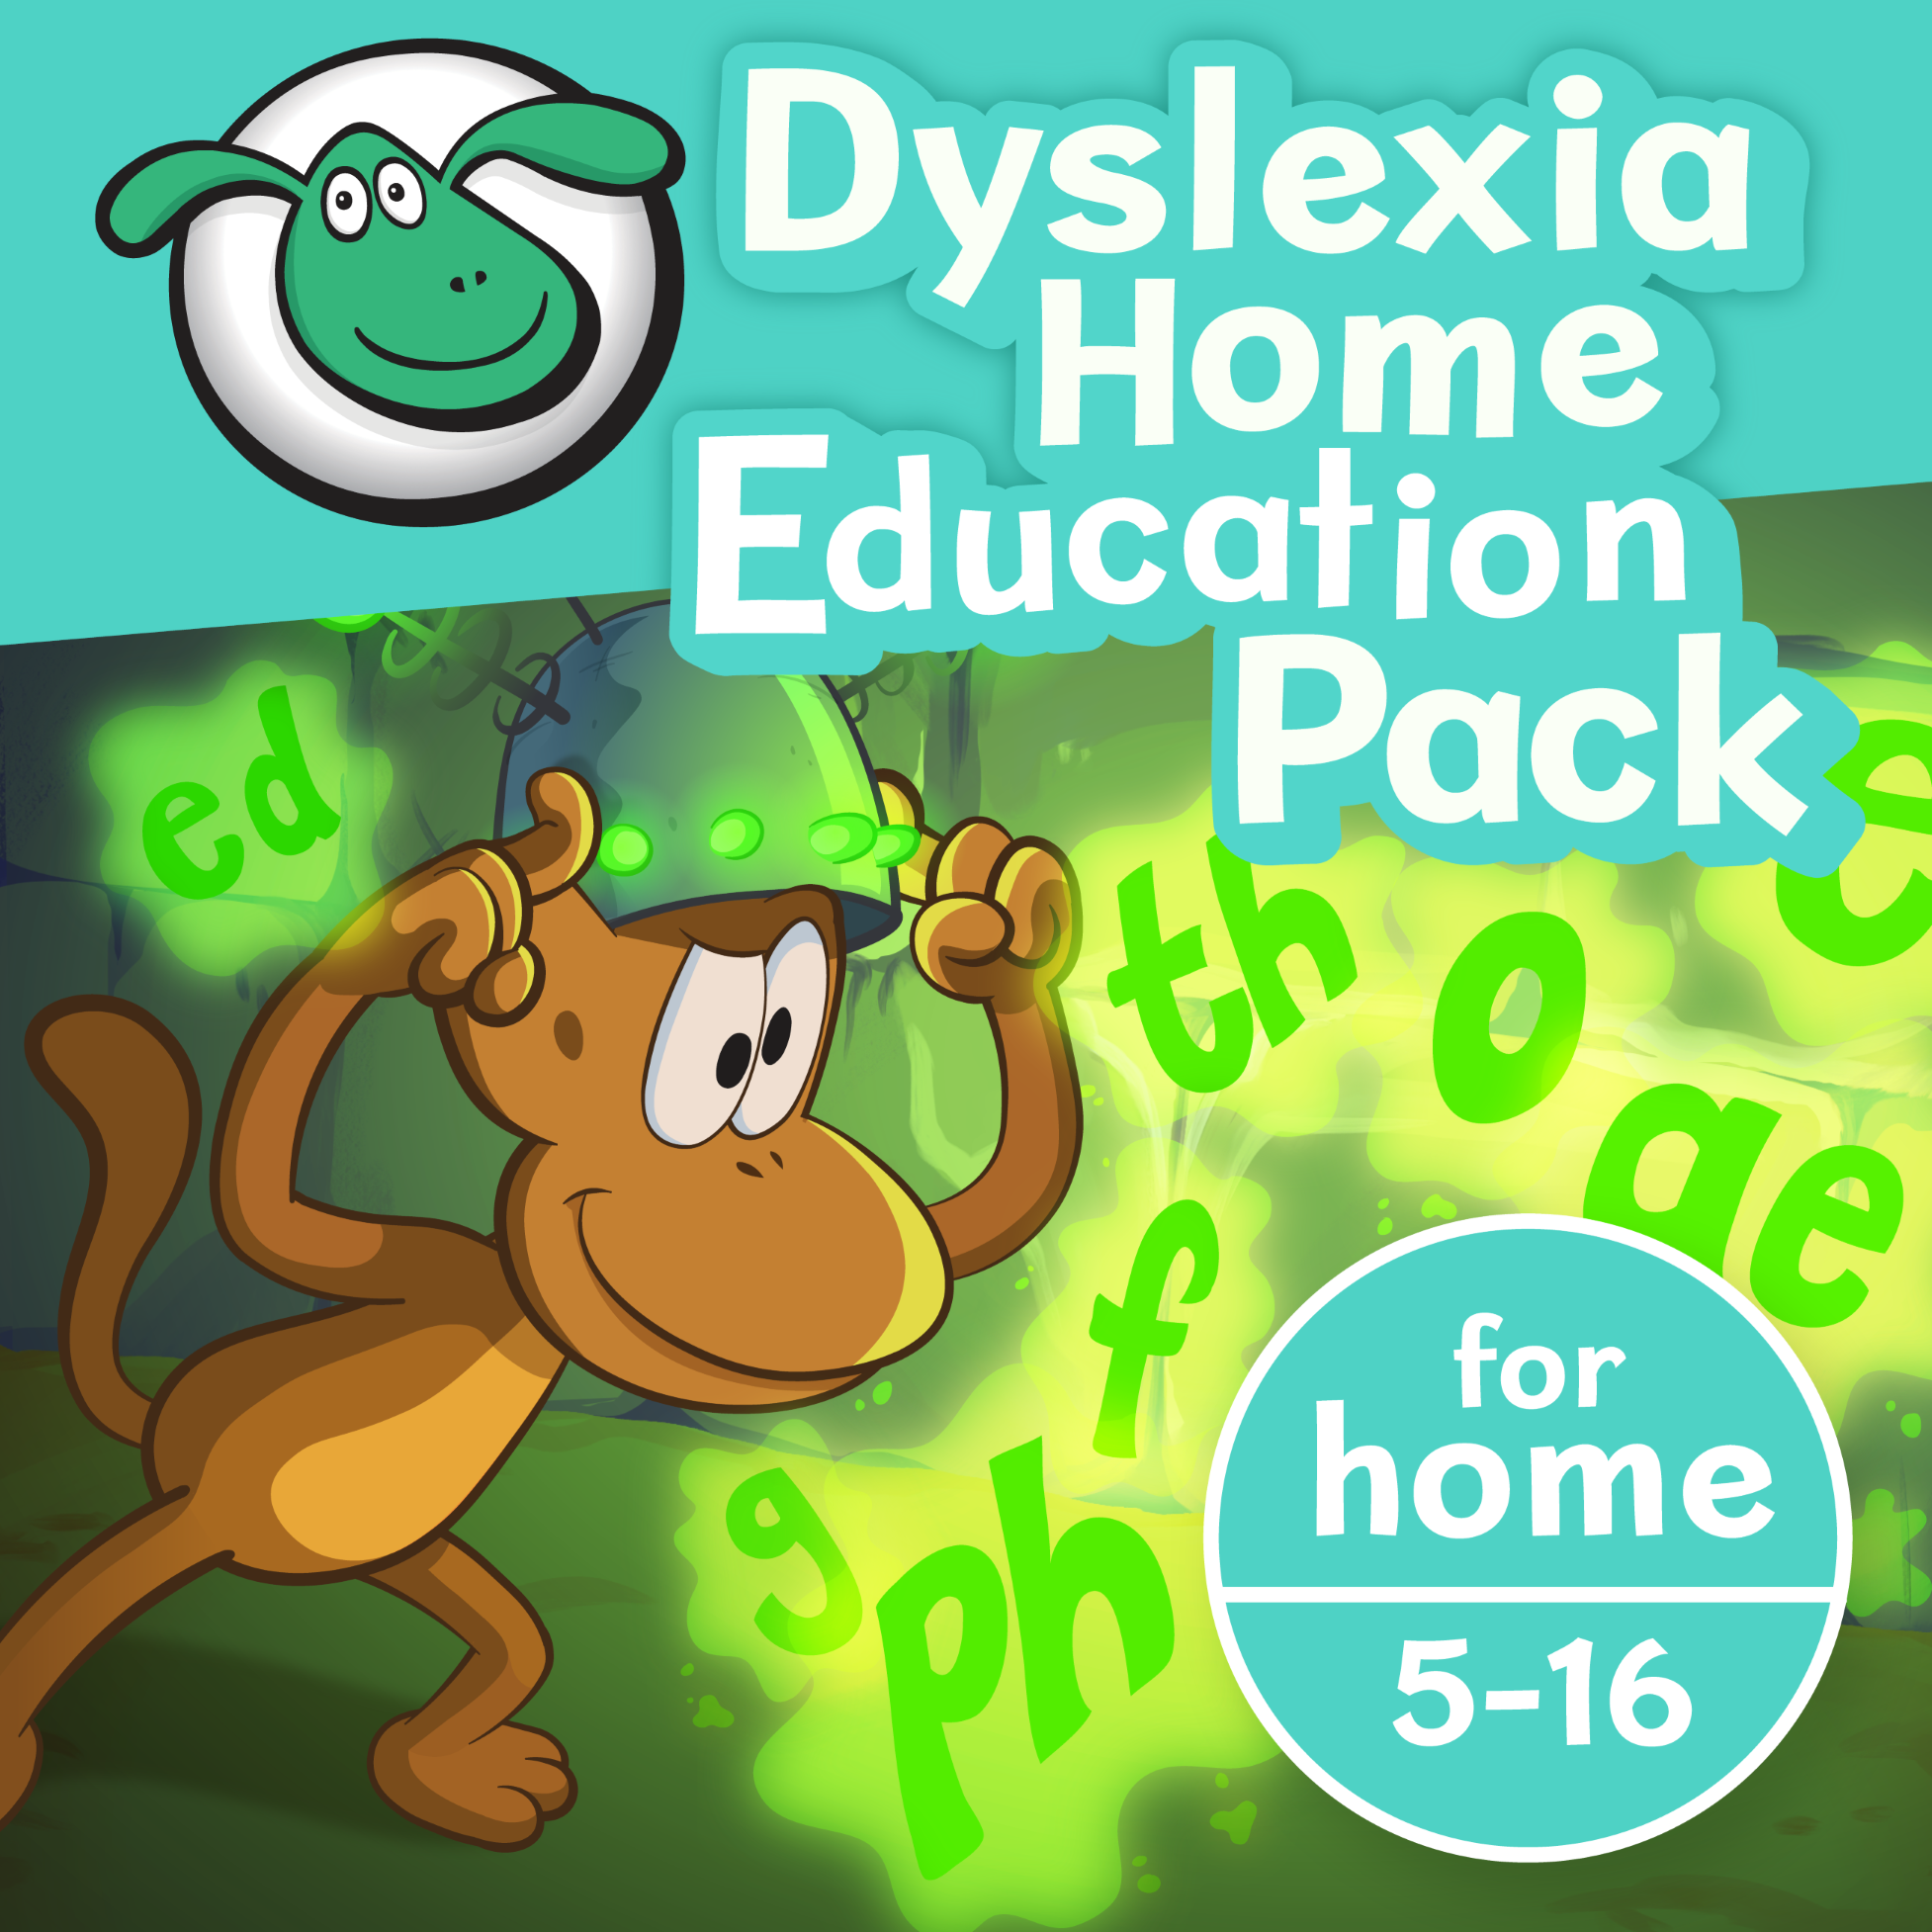 Dyslexia Home Education Pack